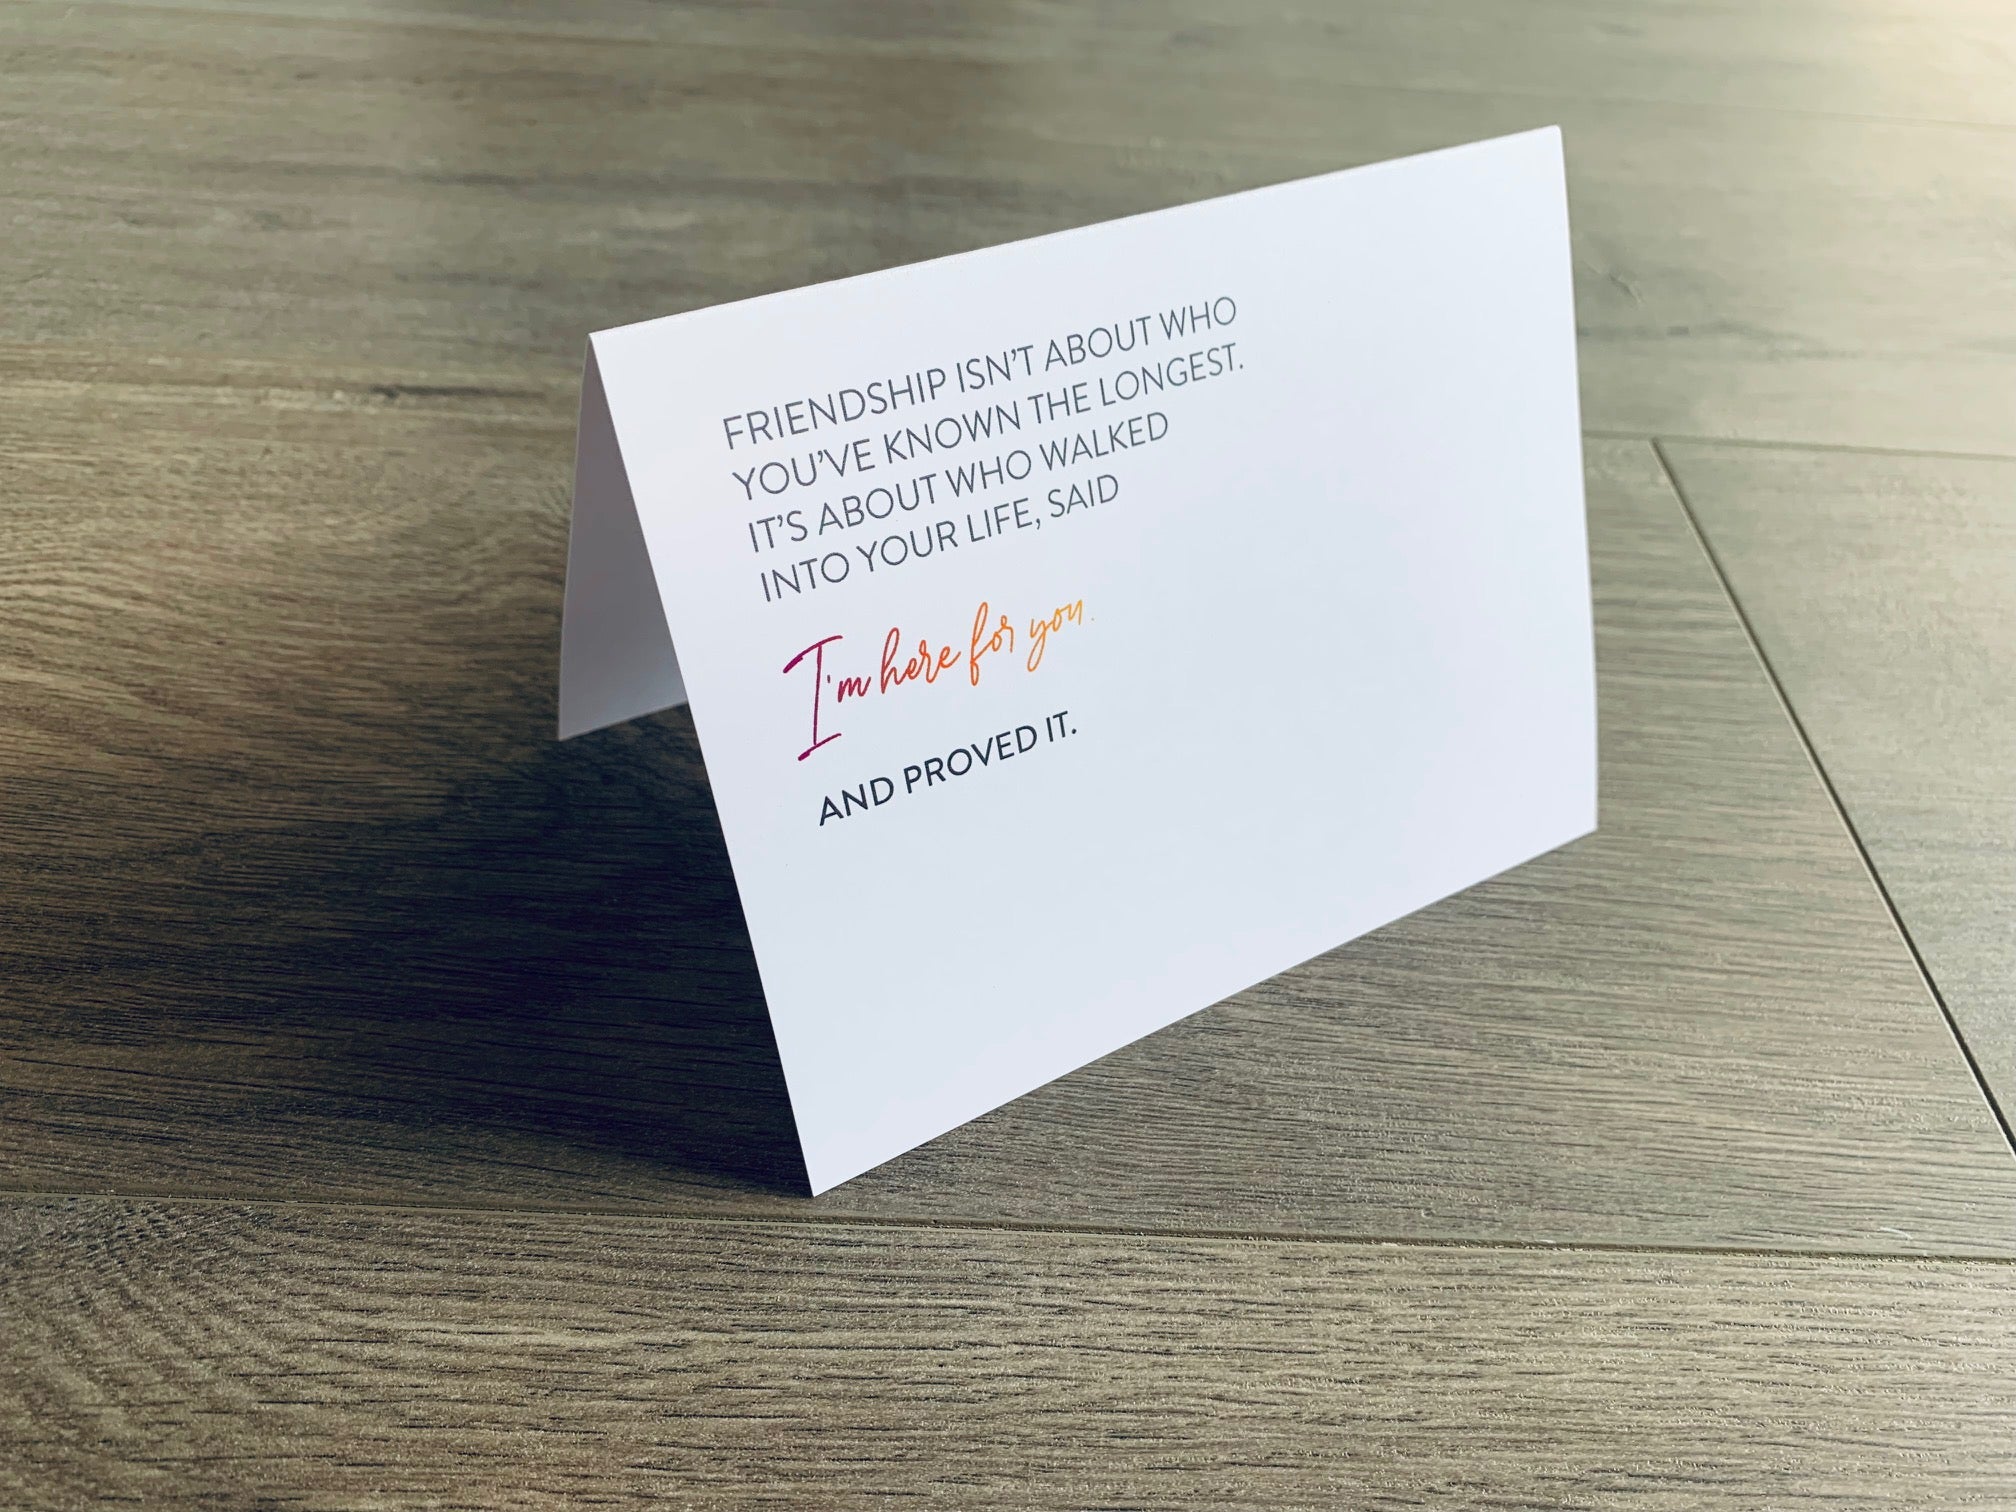 A white, folded notecard sits on a wooden floor. The card says, "Friendship isn't about who you've known the longest. It's about who walked into your life, said I'm here for you and proved it." The Friendship collection by Stationare.